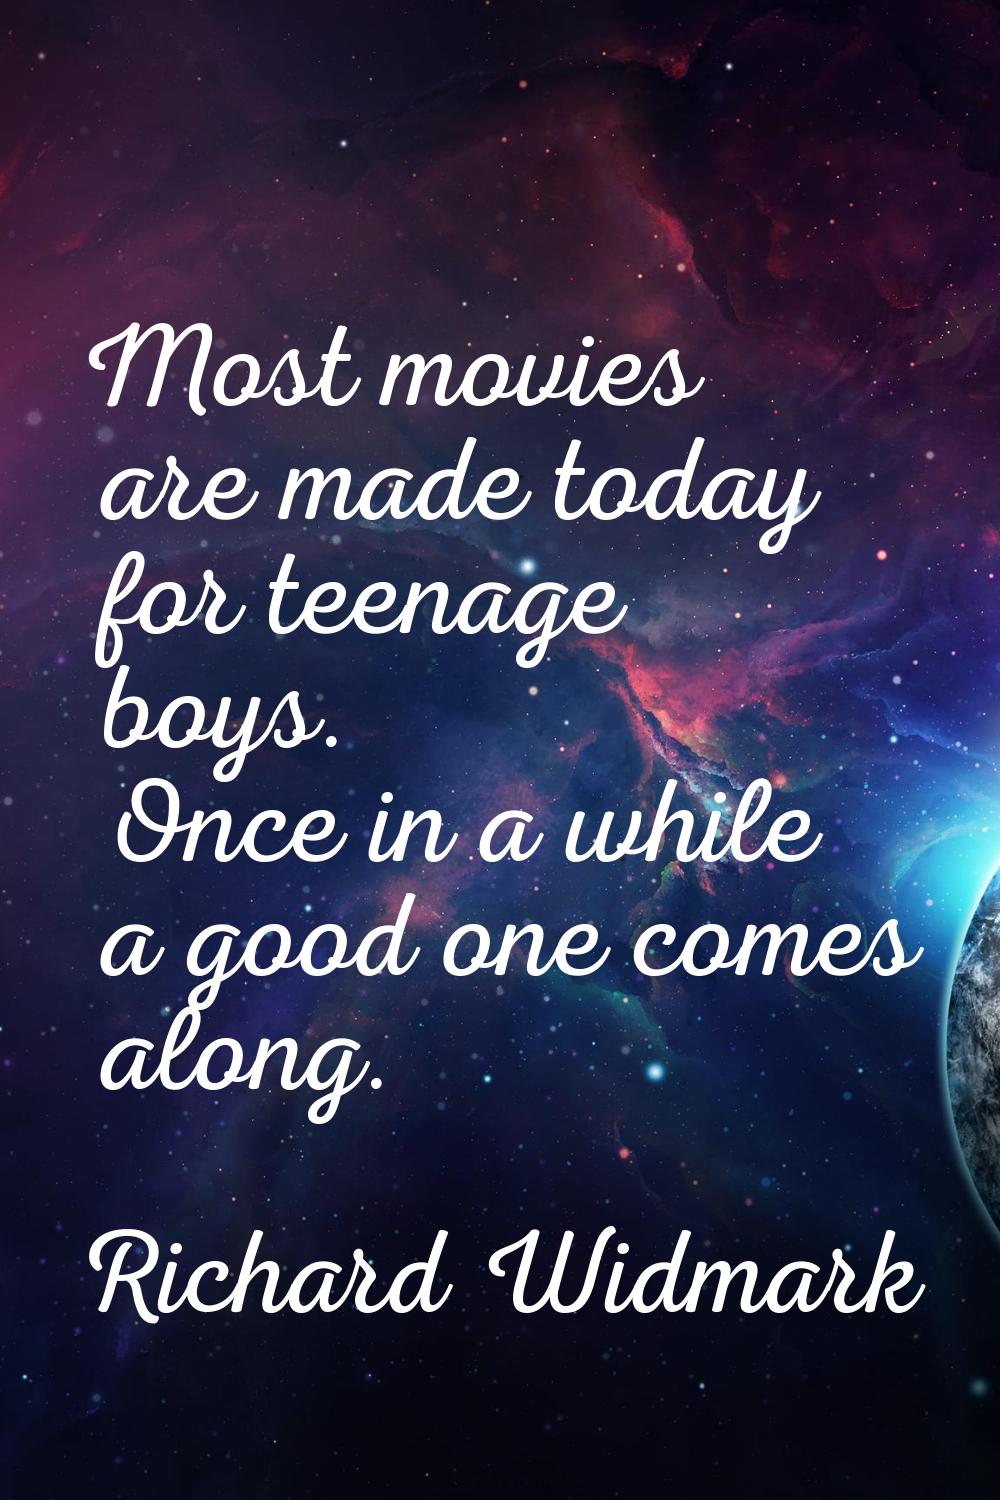 Most movies are made today for teenage boys. Once in a while a good one comes along.